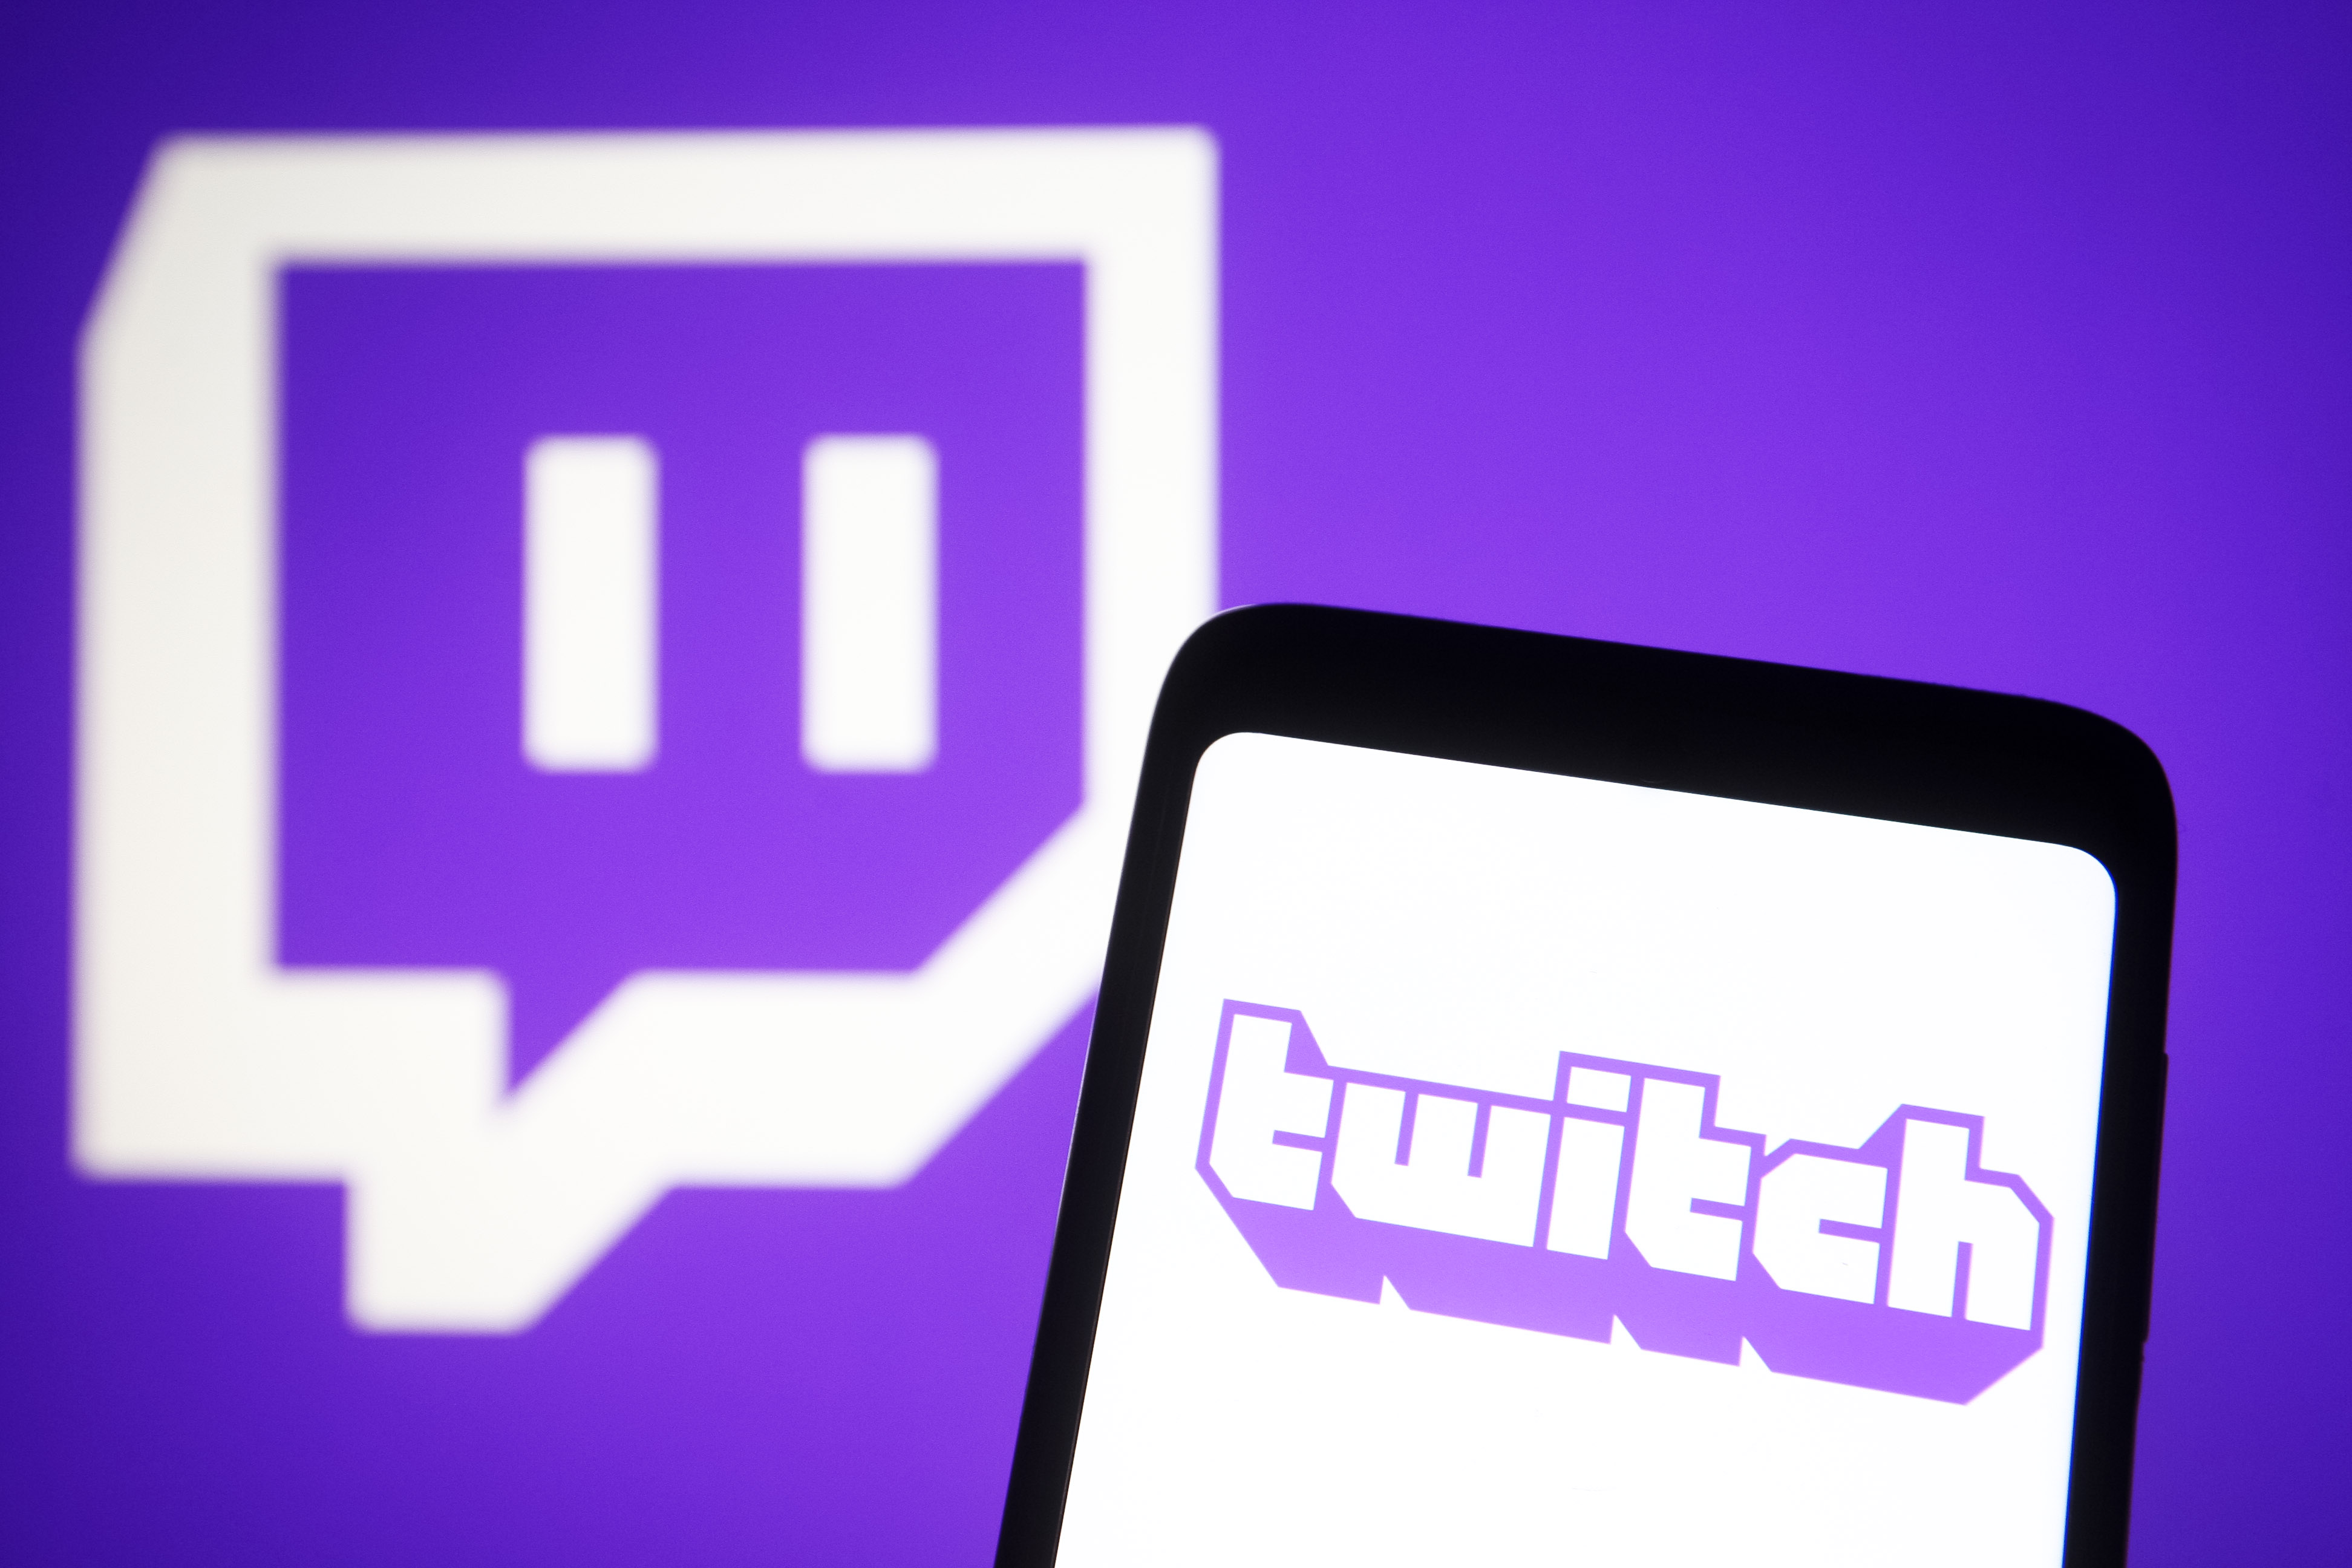 Twitch streaming is a job that's harder than it looks. Here's how